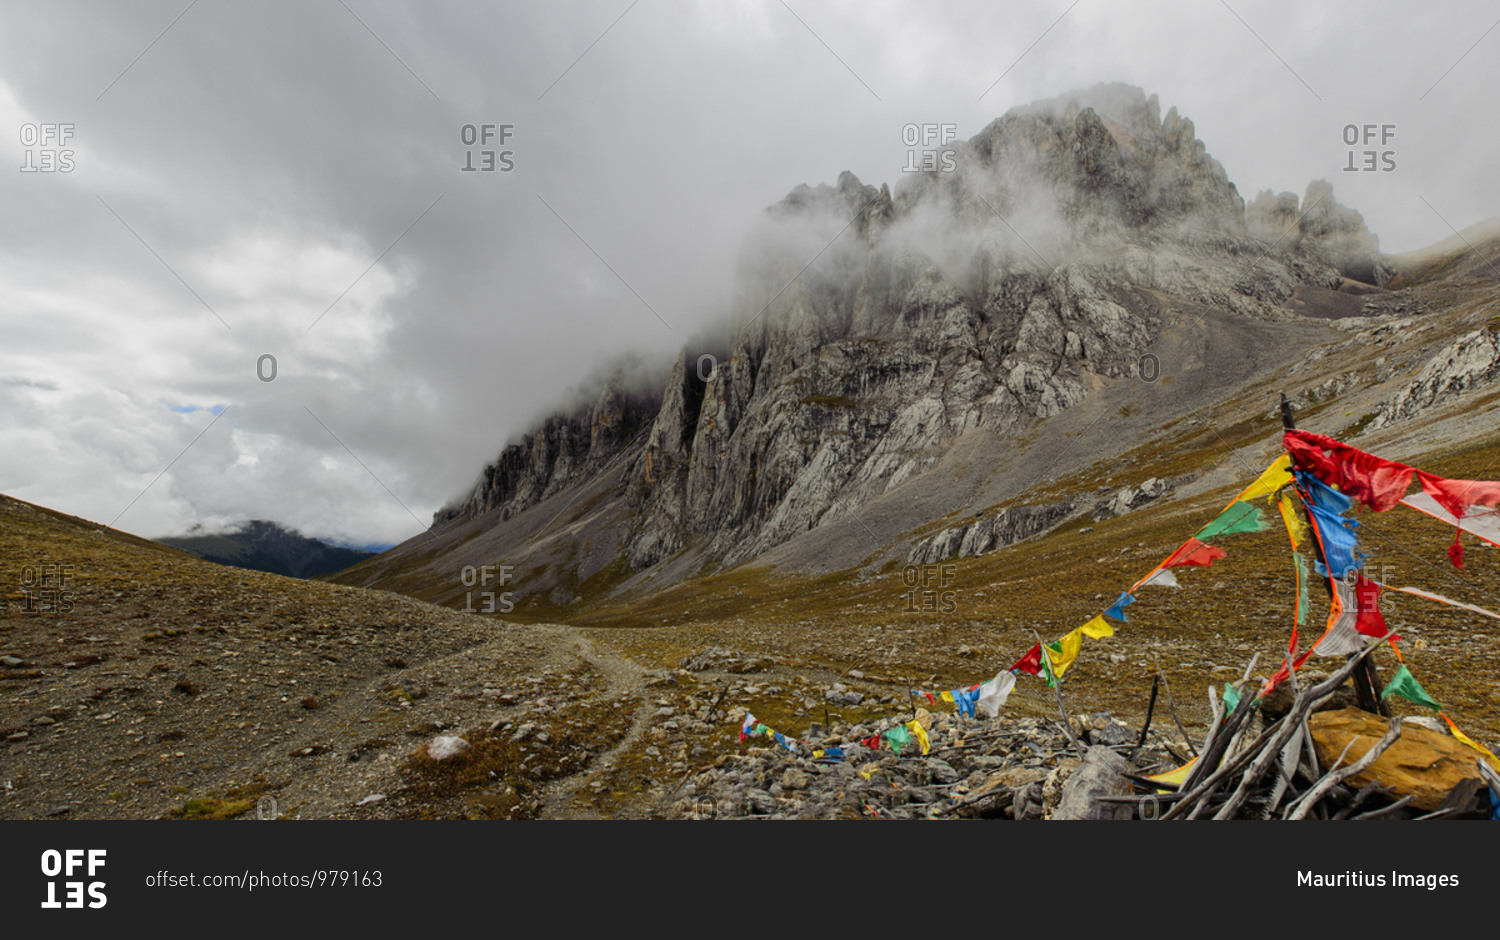 Remote mountain pass on the Tibetan plateau, indicated by Tibetan prayer flags, in Sichuan province, China